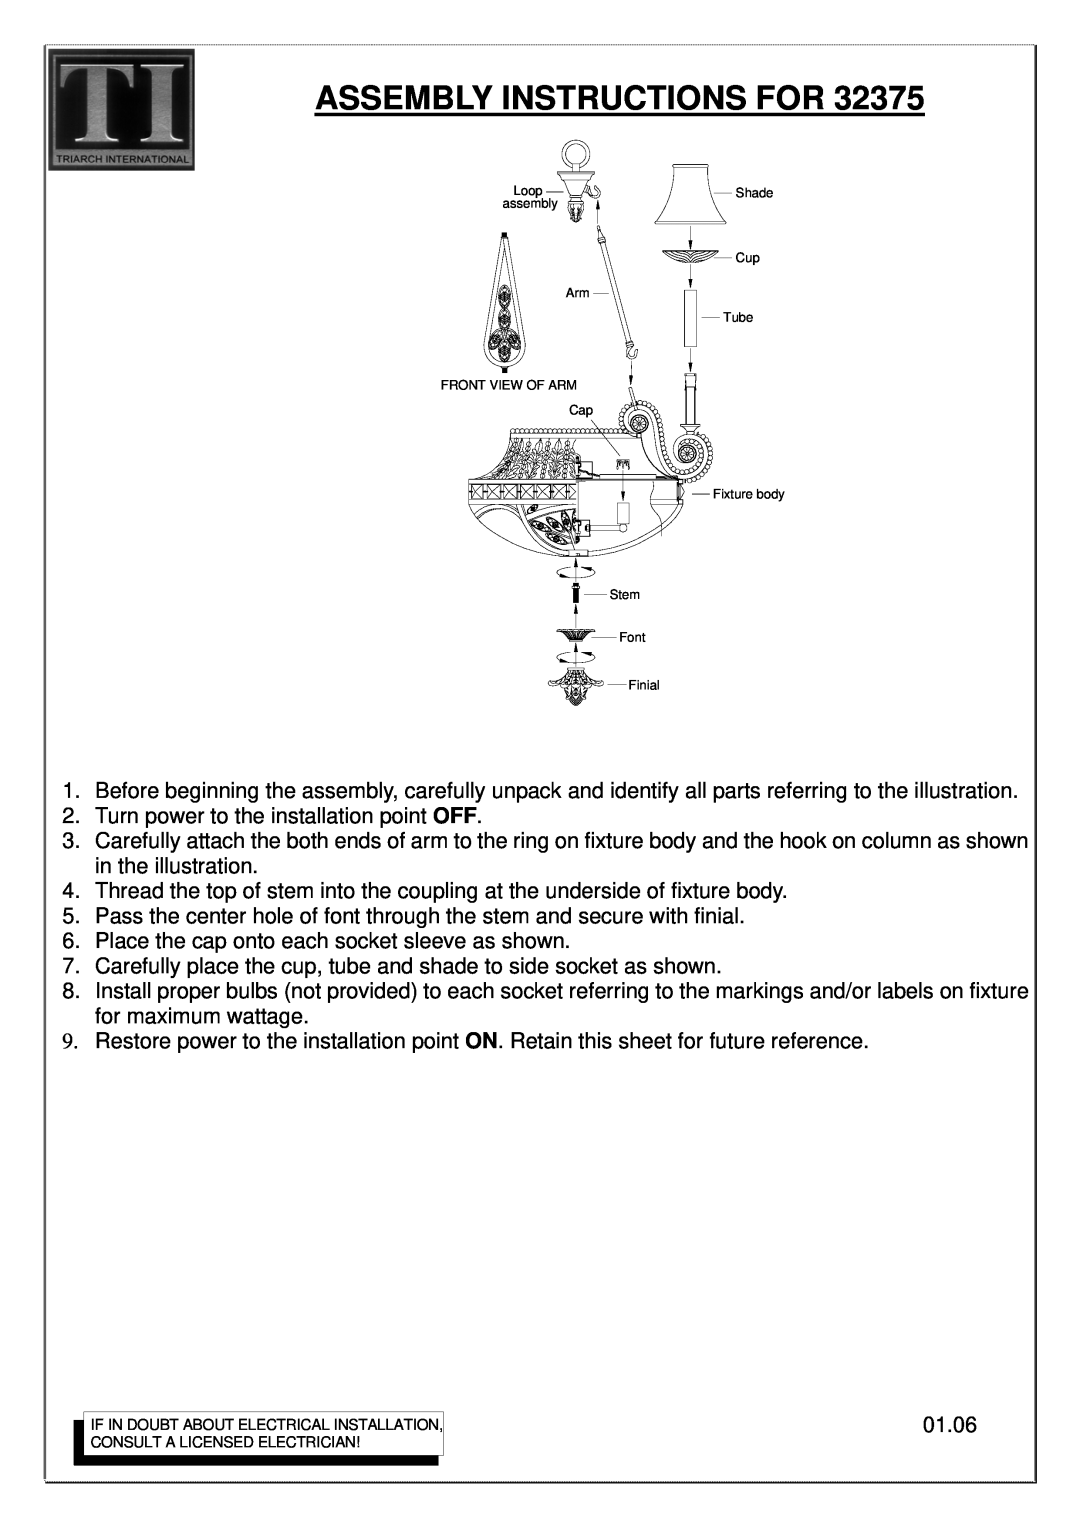 Triarch 32375 manual Assembly Instructions For 